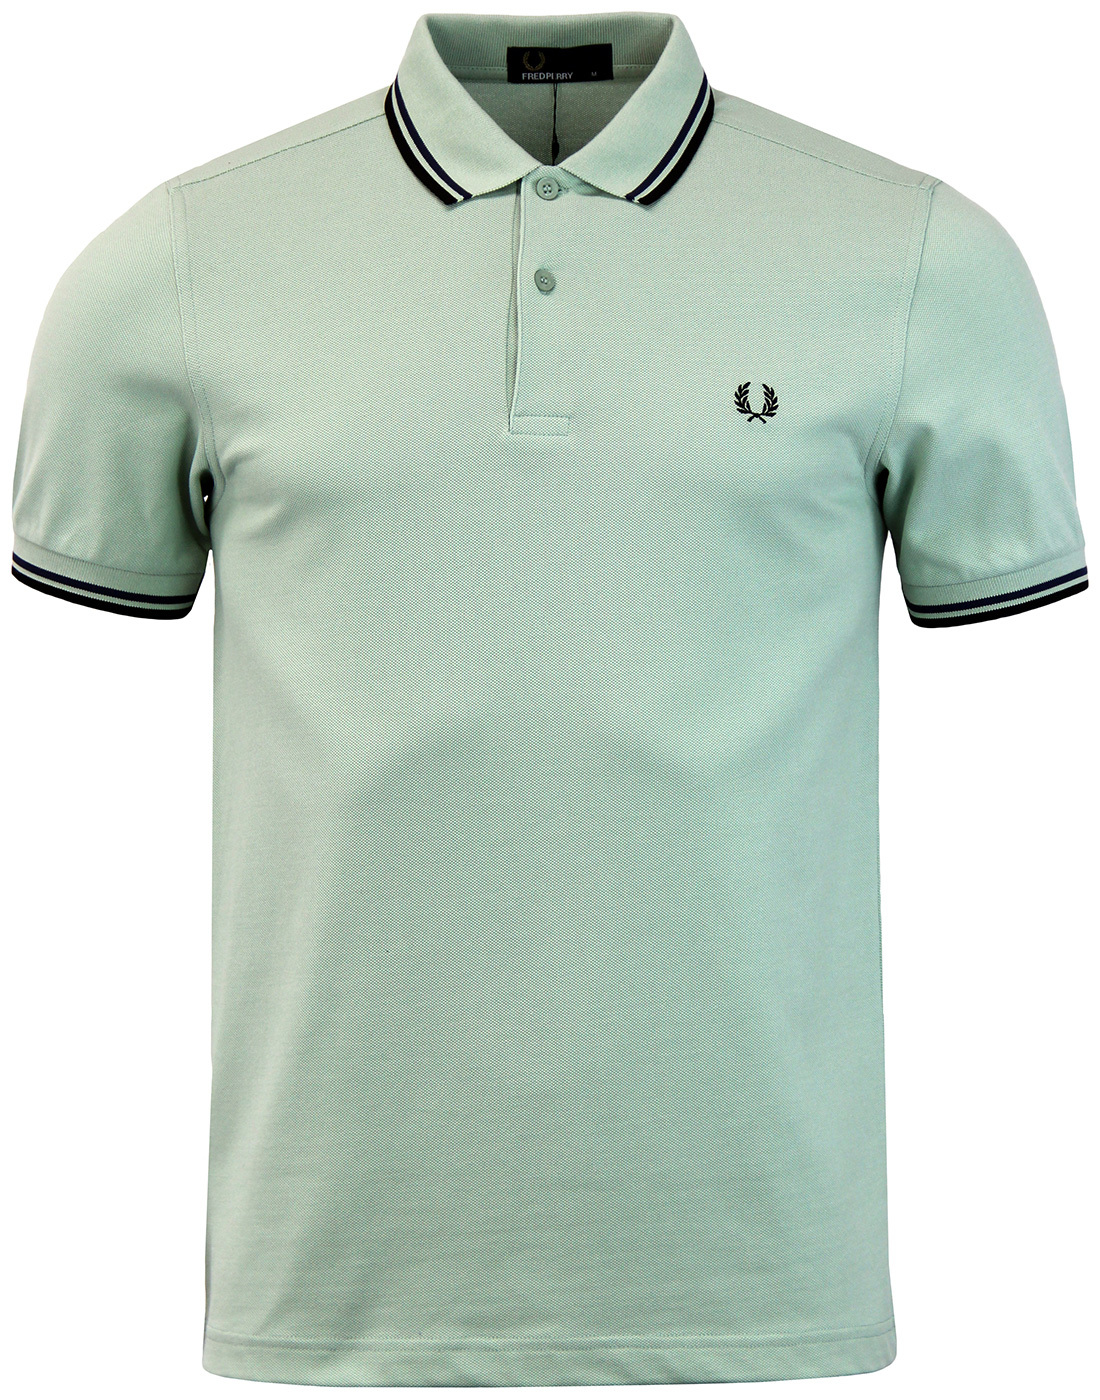 FRED PERRY M3600 Mod Twin Tipped Polo Shirt in Mint Green